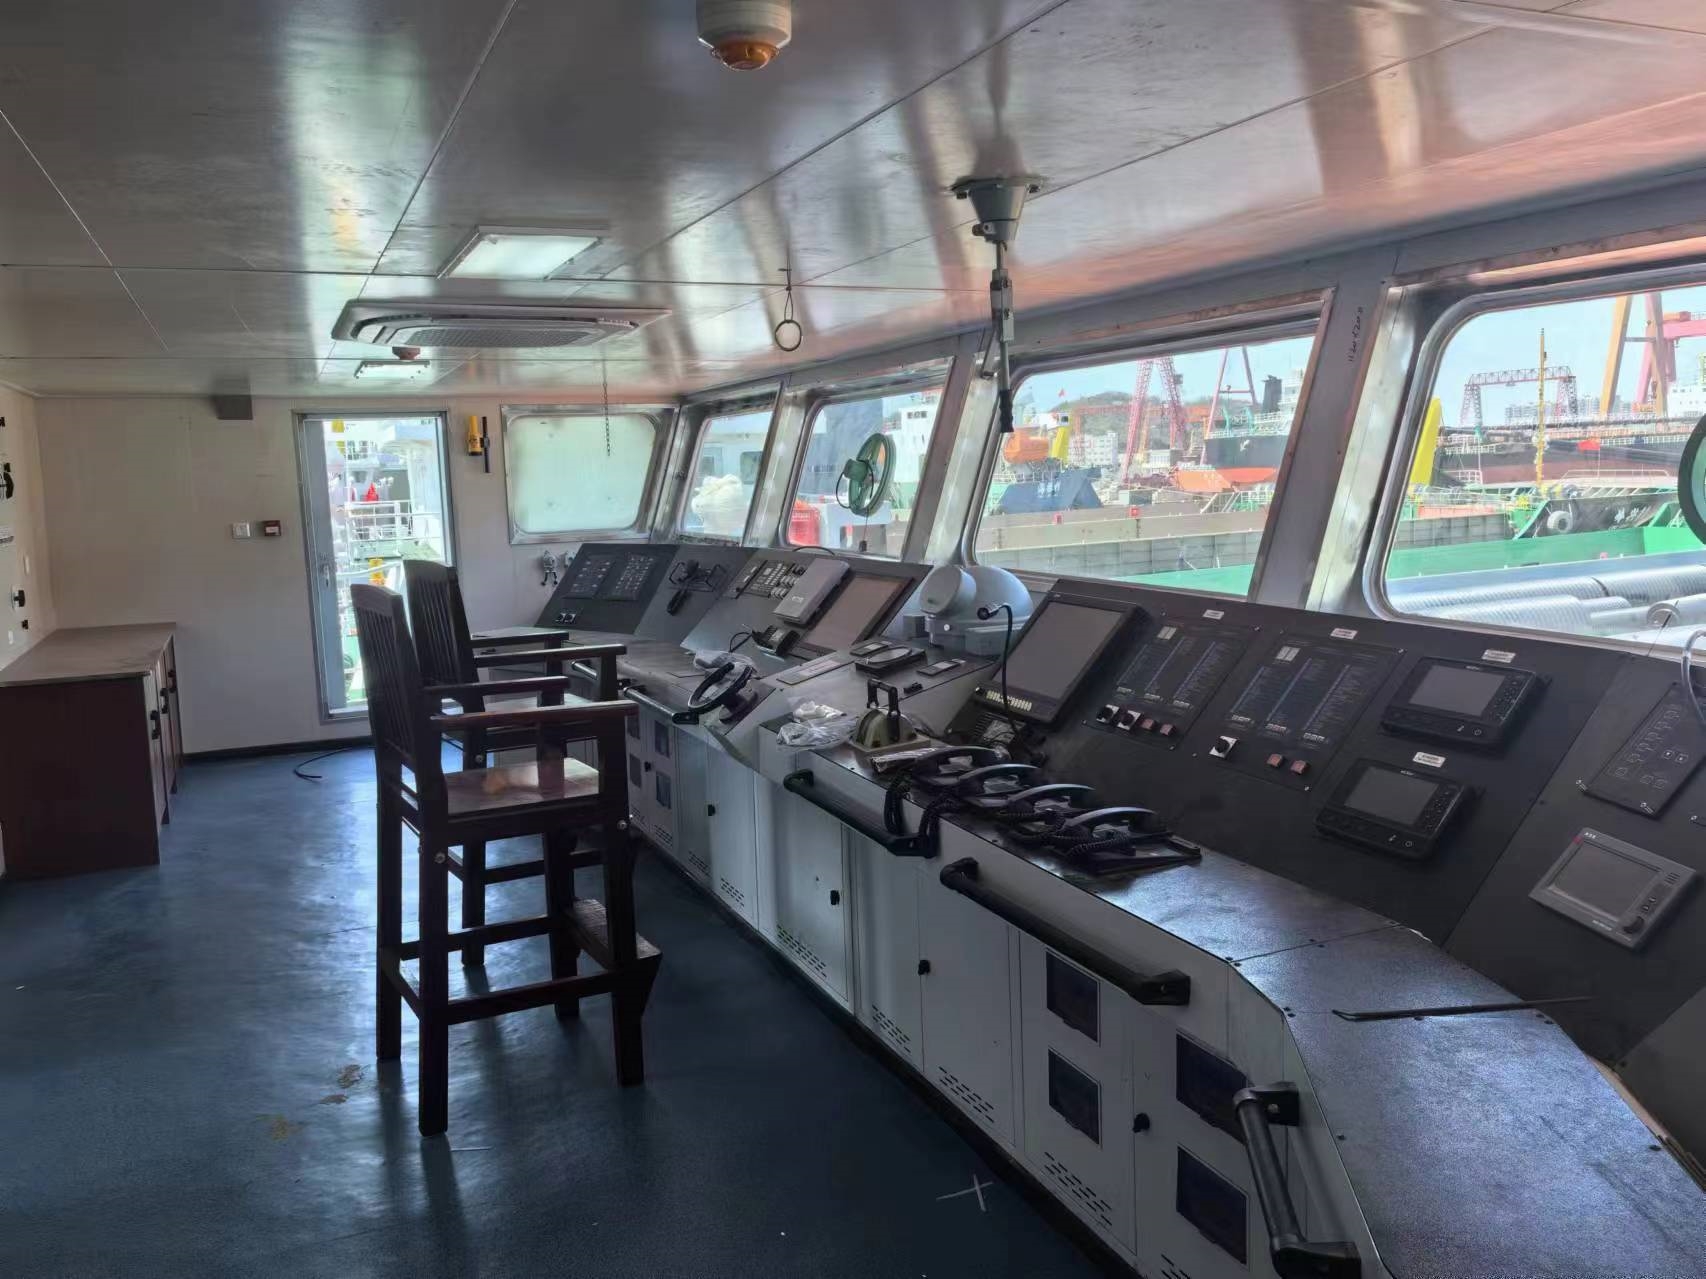 3650 T Deck Barge /LCT For Sale